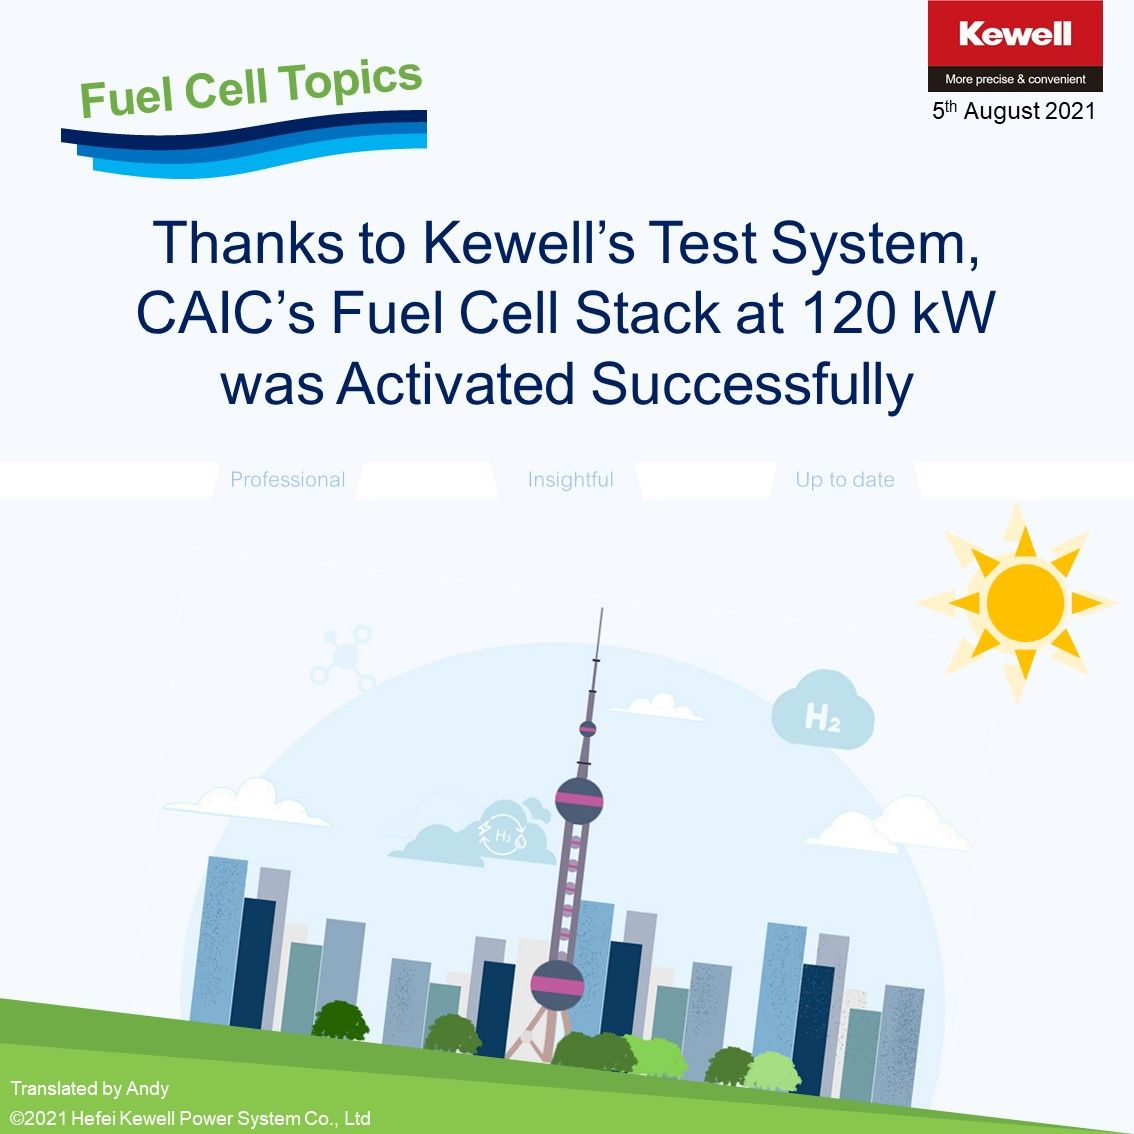 Fuel Cell Topics: Thanks to Kewell's Test System, CAIC's 120kW Fuel Cell Stack was Activated Successfully